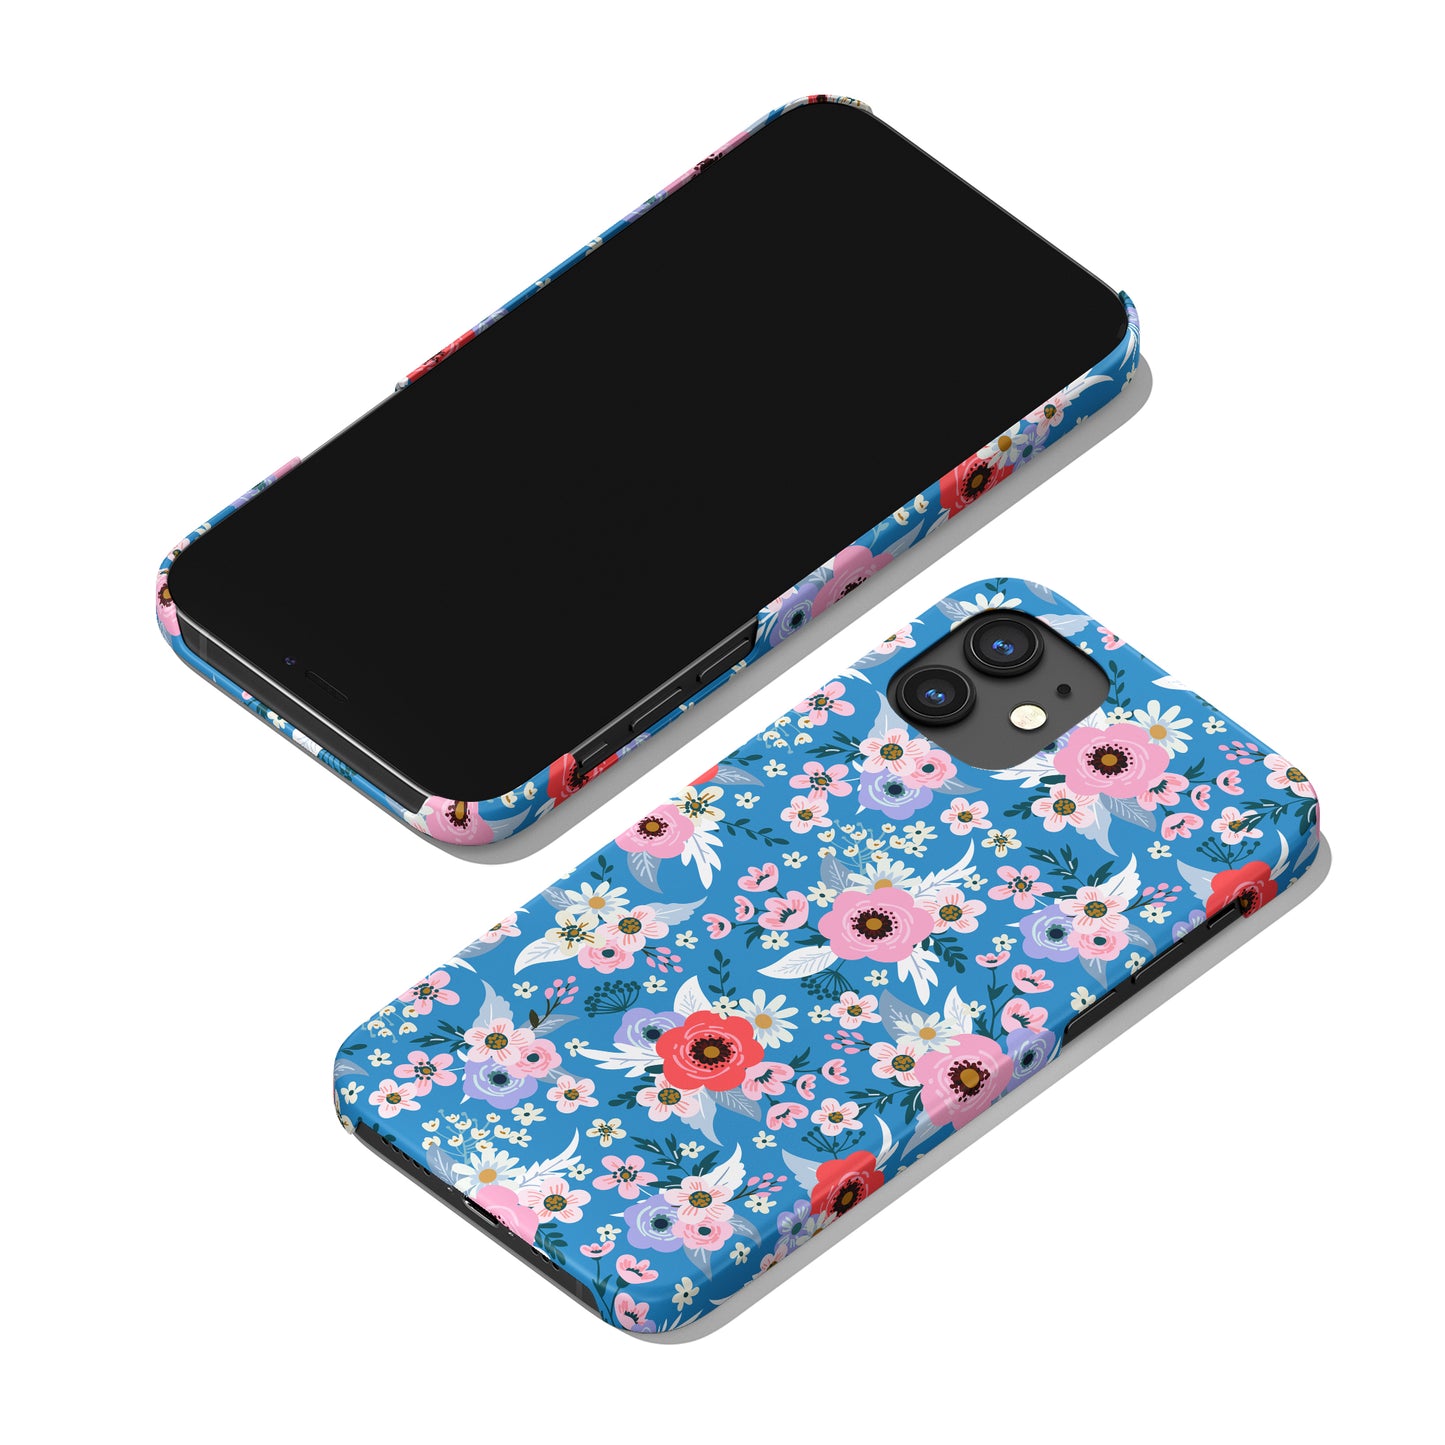 Blue Laura Ashley Inspired iPhone Case